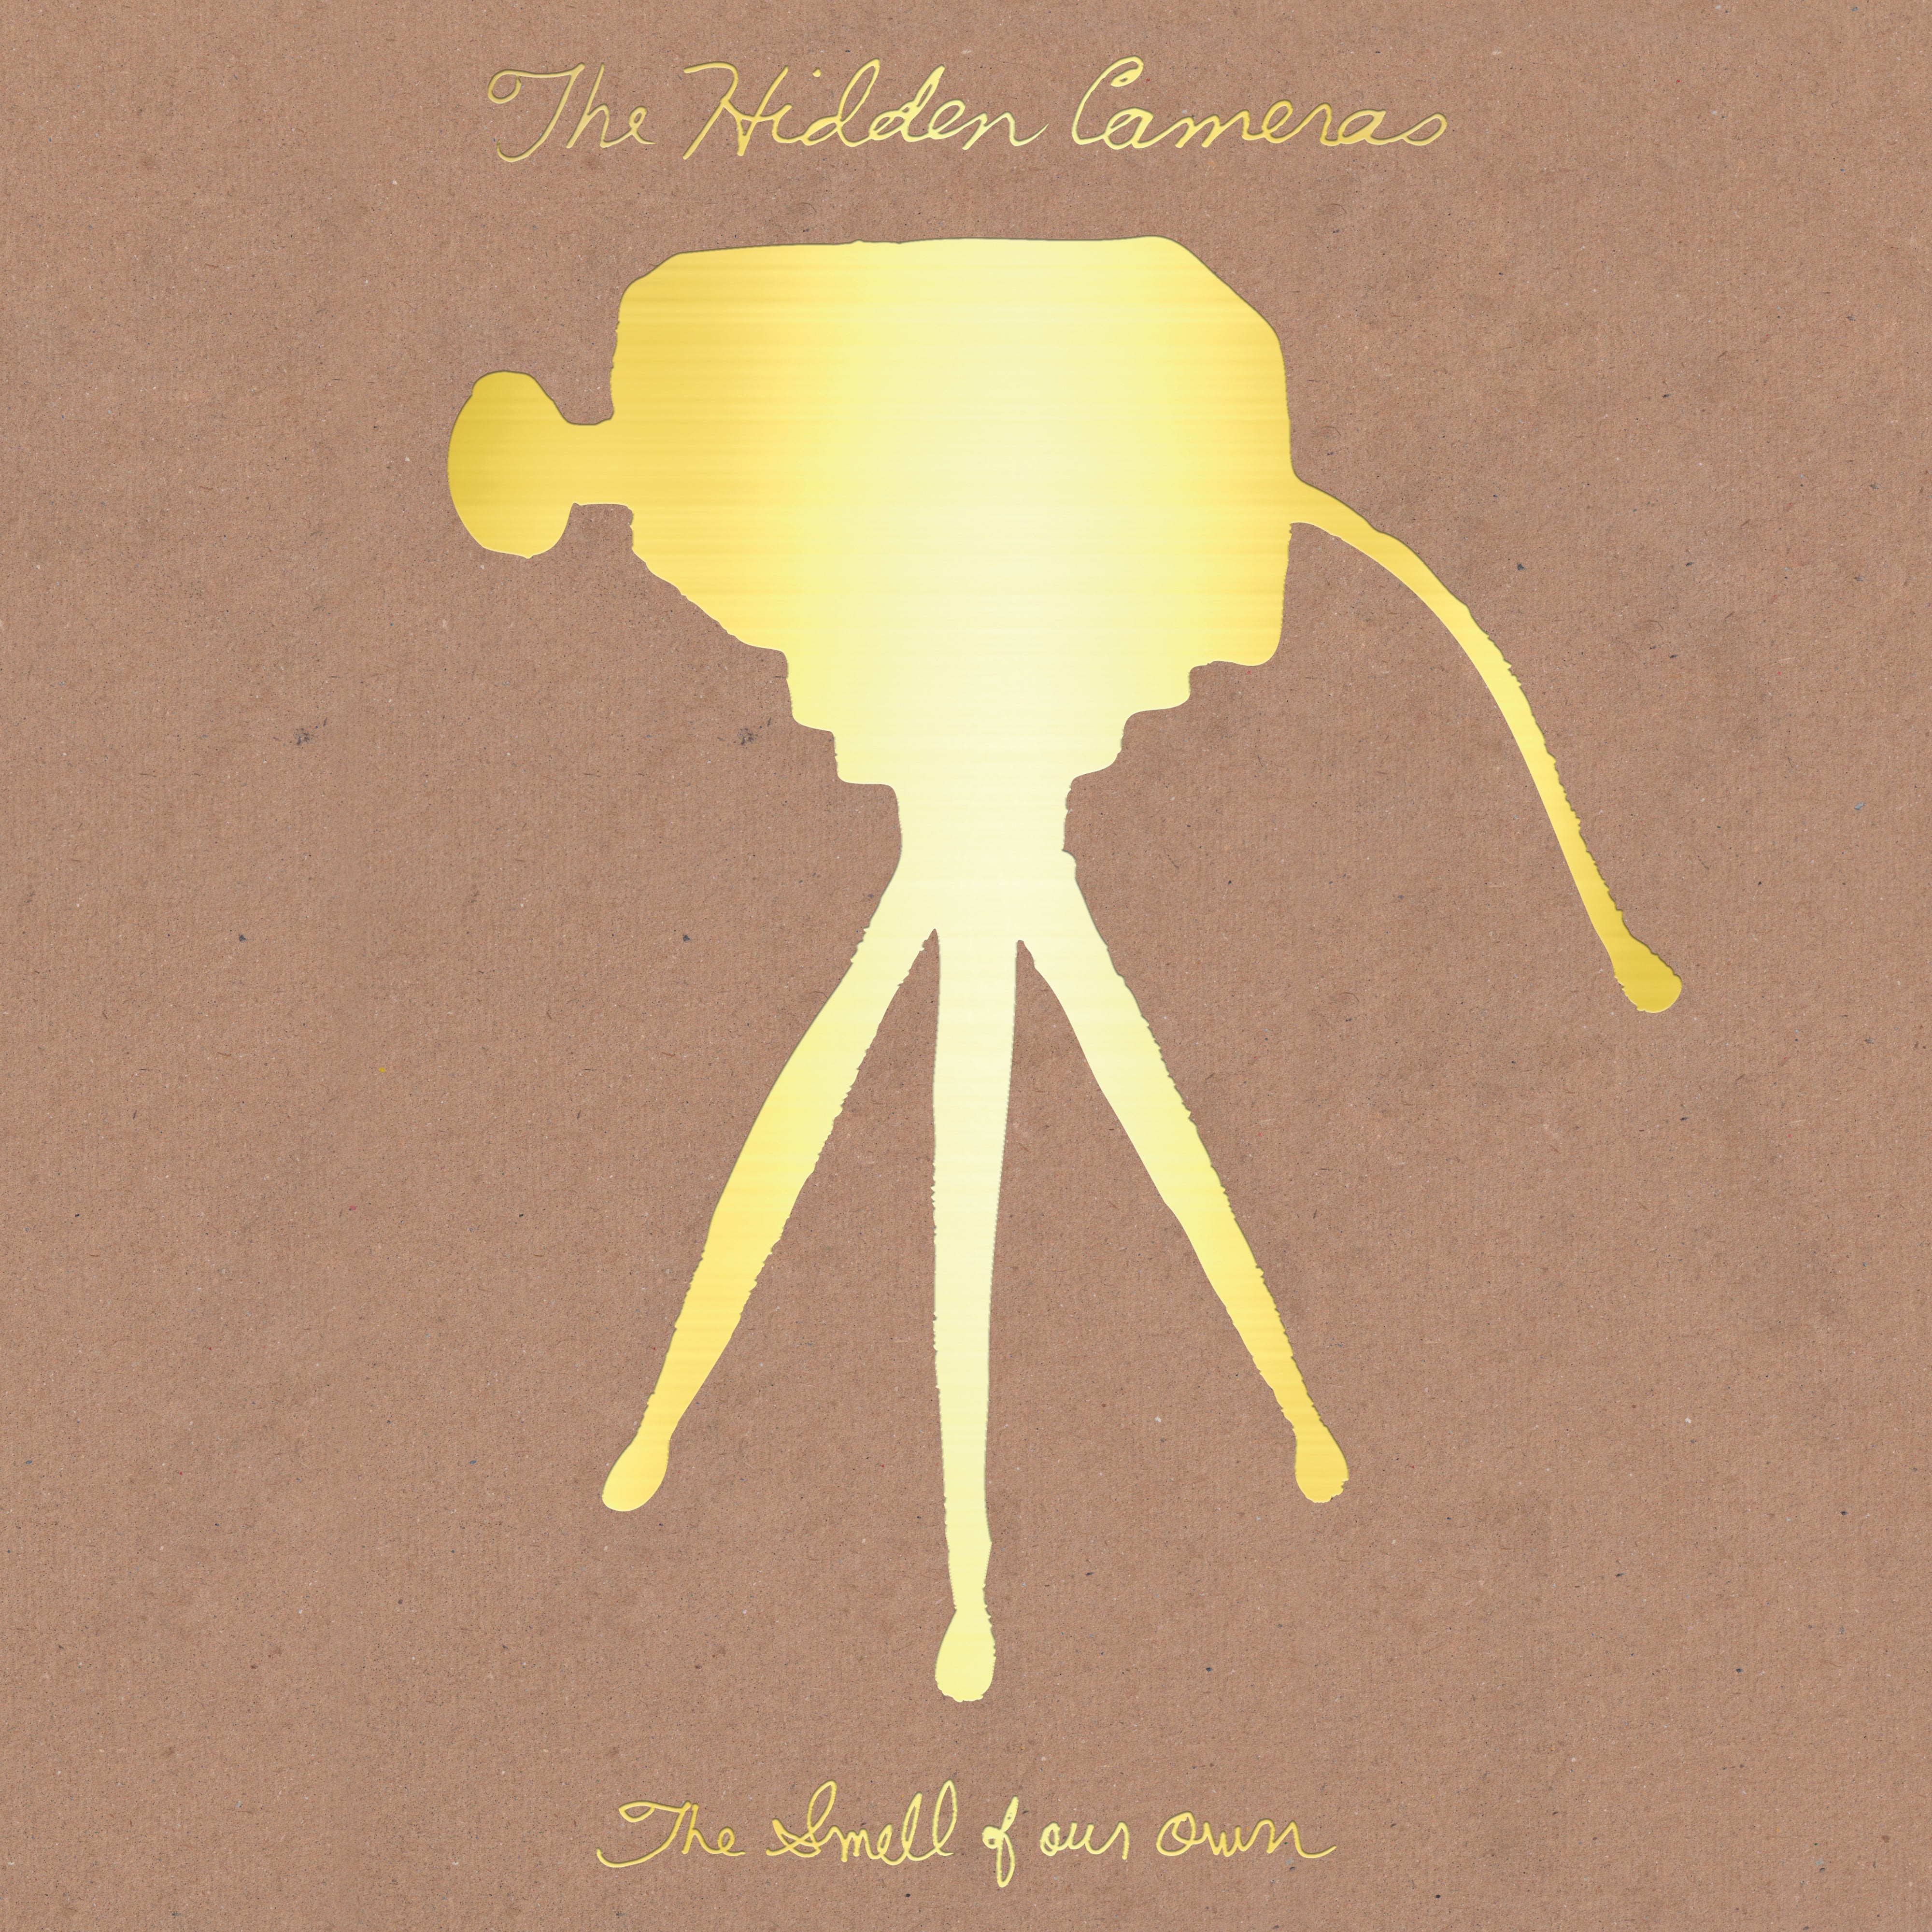 The Hidden Cameras - The Smell Of Our Own - 20th Anniversary Edition: Deluxe Yellow Vinyl 2LP